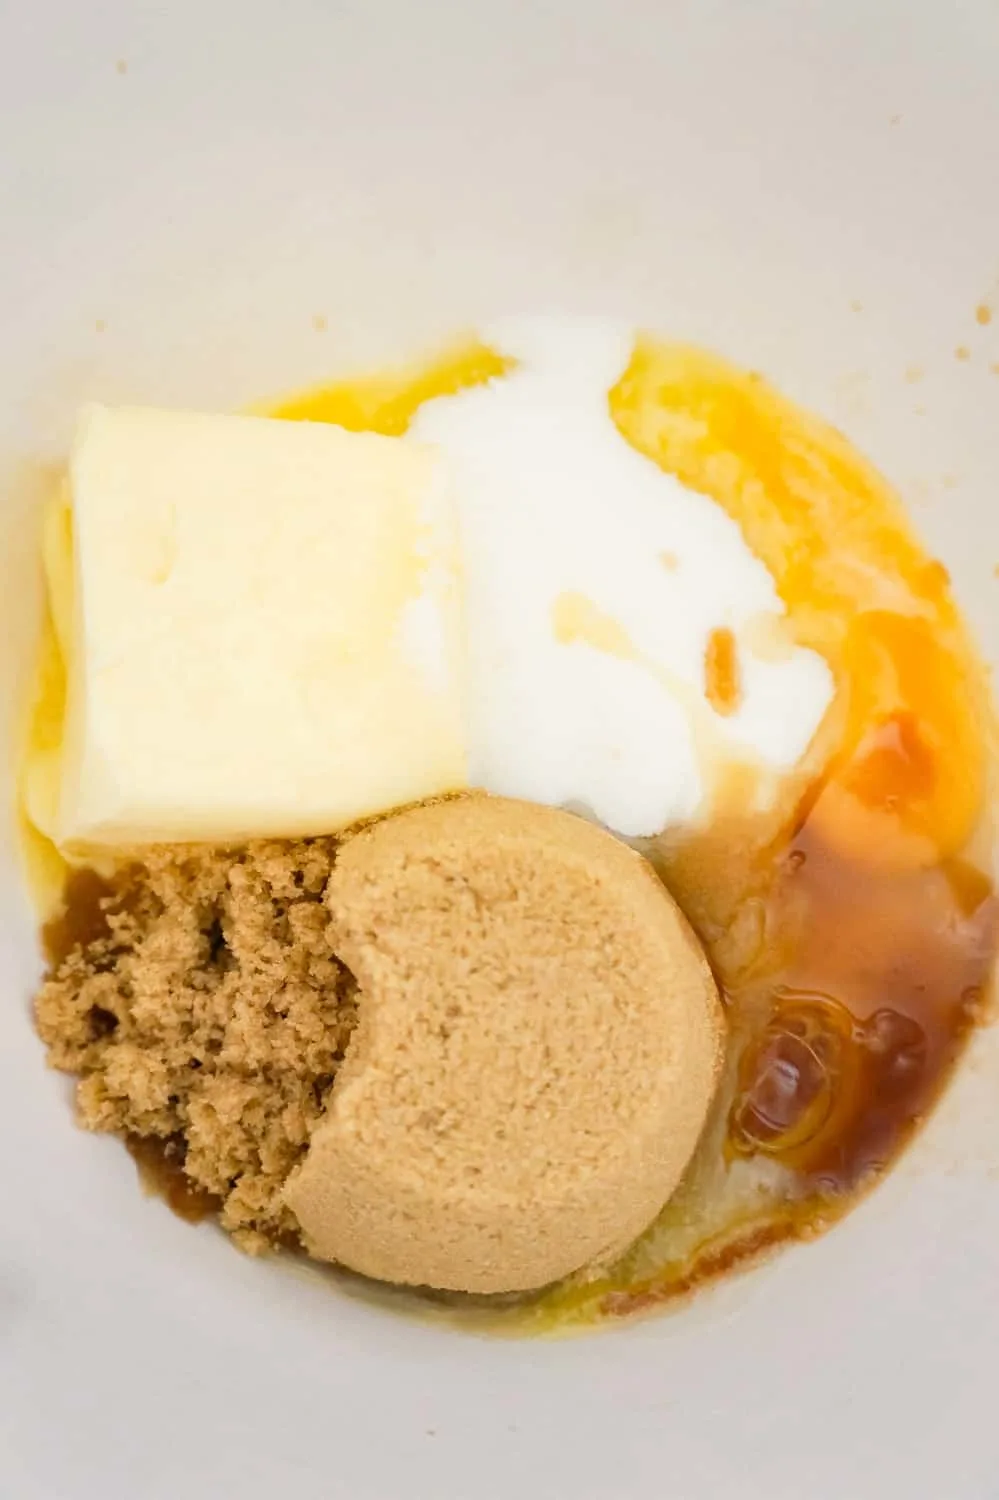 brown sugar, granulated sugar, softened butter, vanilla extract and an egg in a mixing bowl